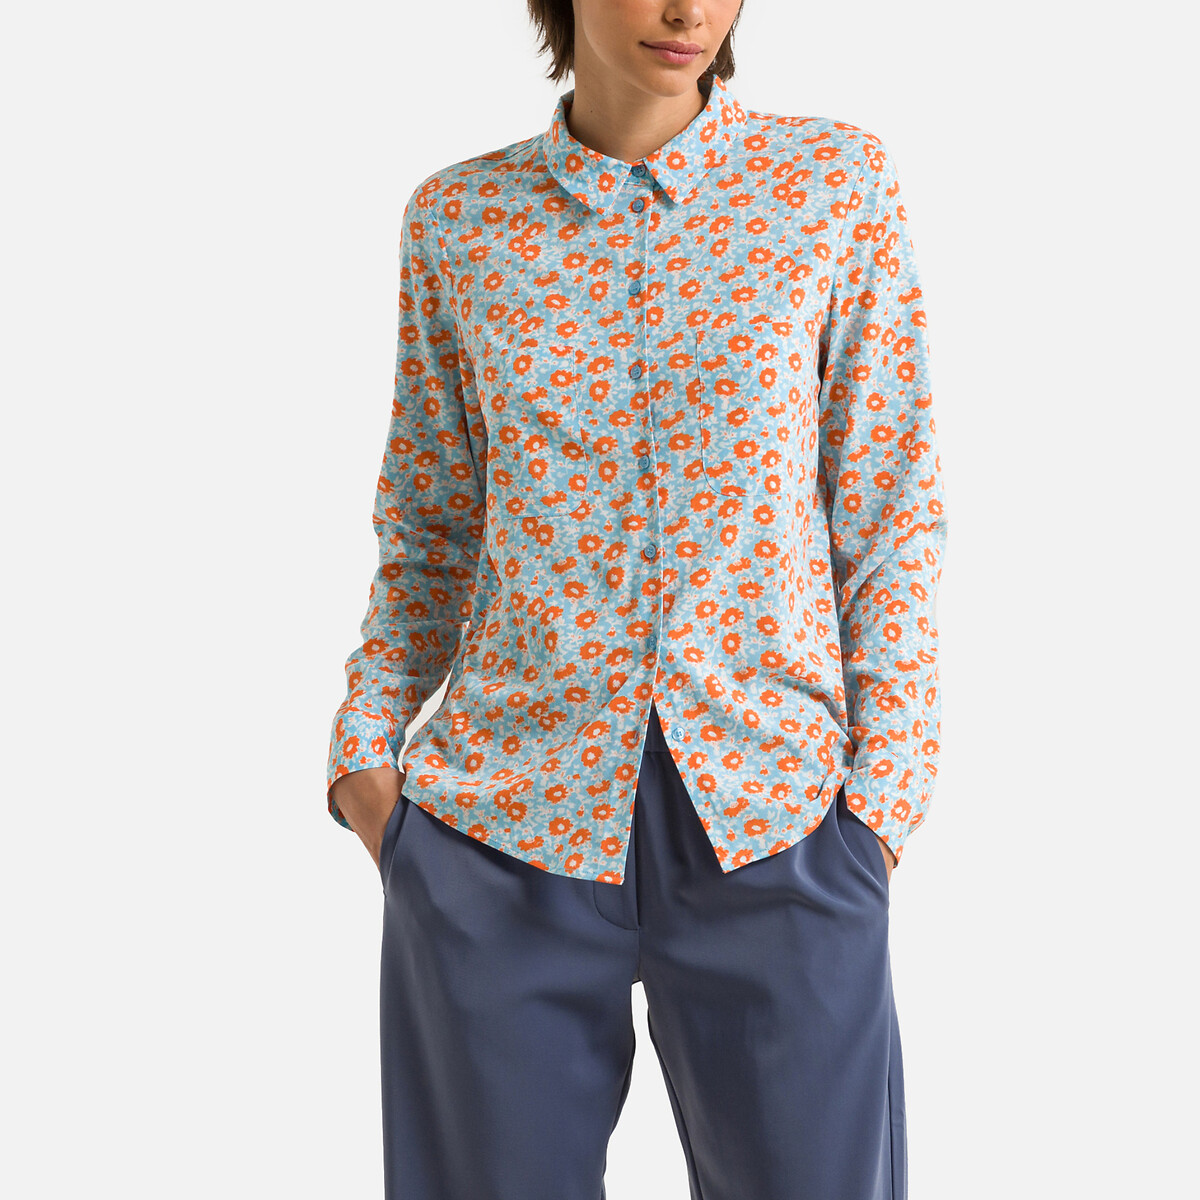 Milly Floral Print Shirt with Long Sleeves